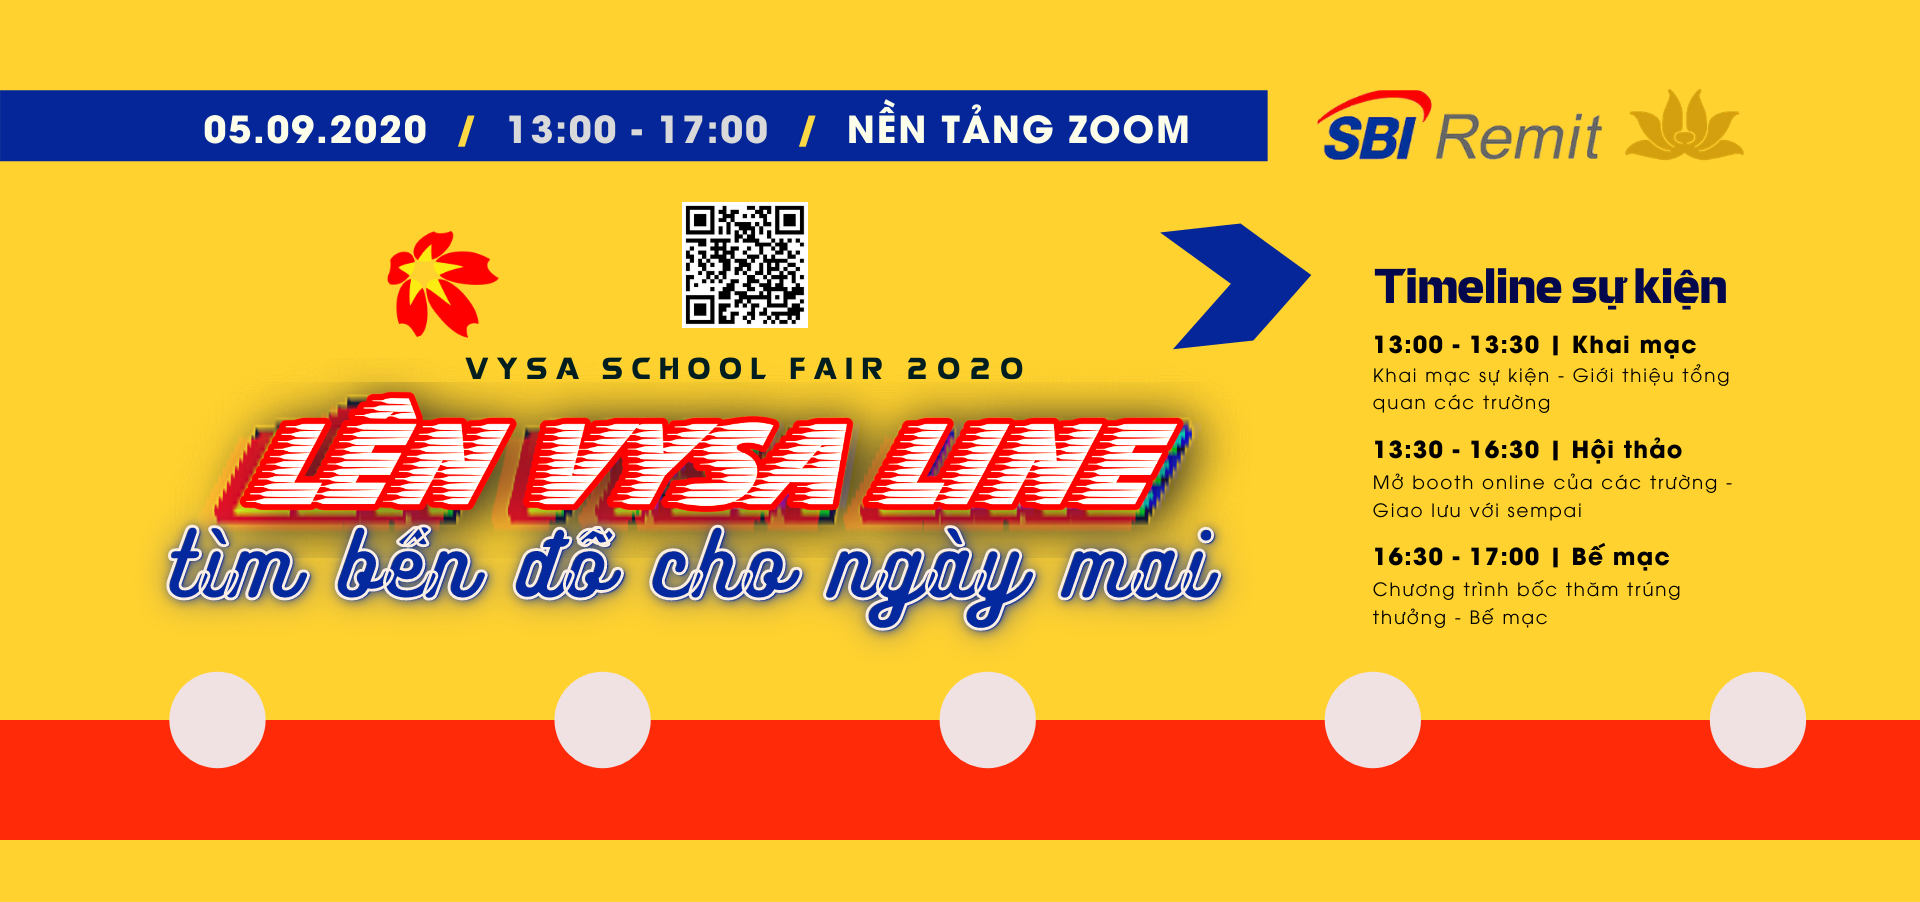 You are currently viewing TỔNG KẾT SỰ KIỆN VYSA SCHOOL FAIR ONLINE 2020